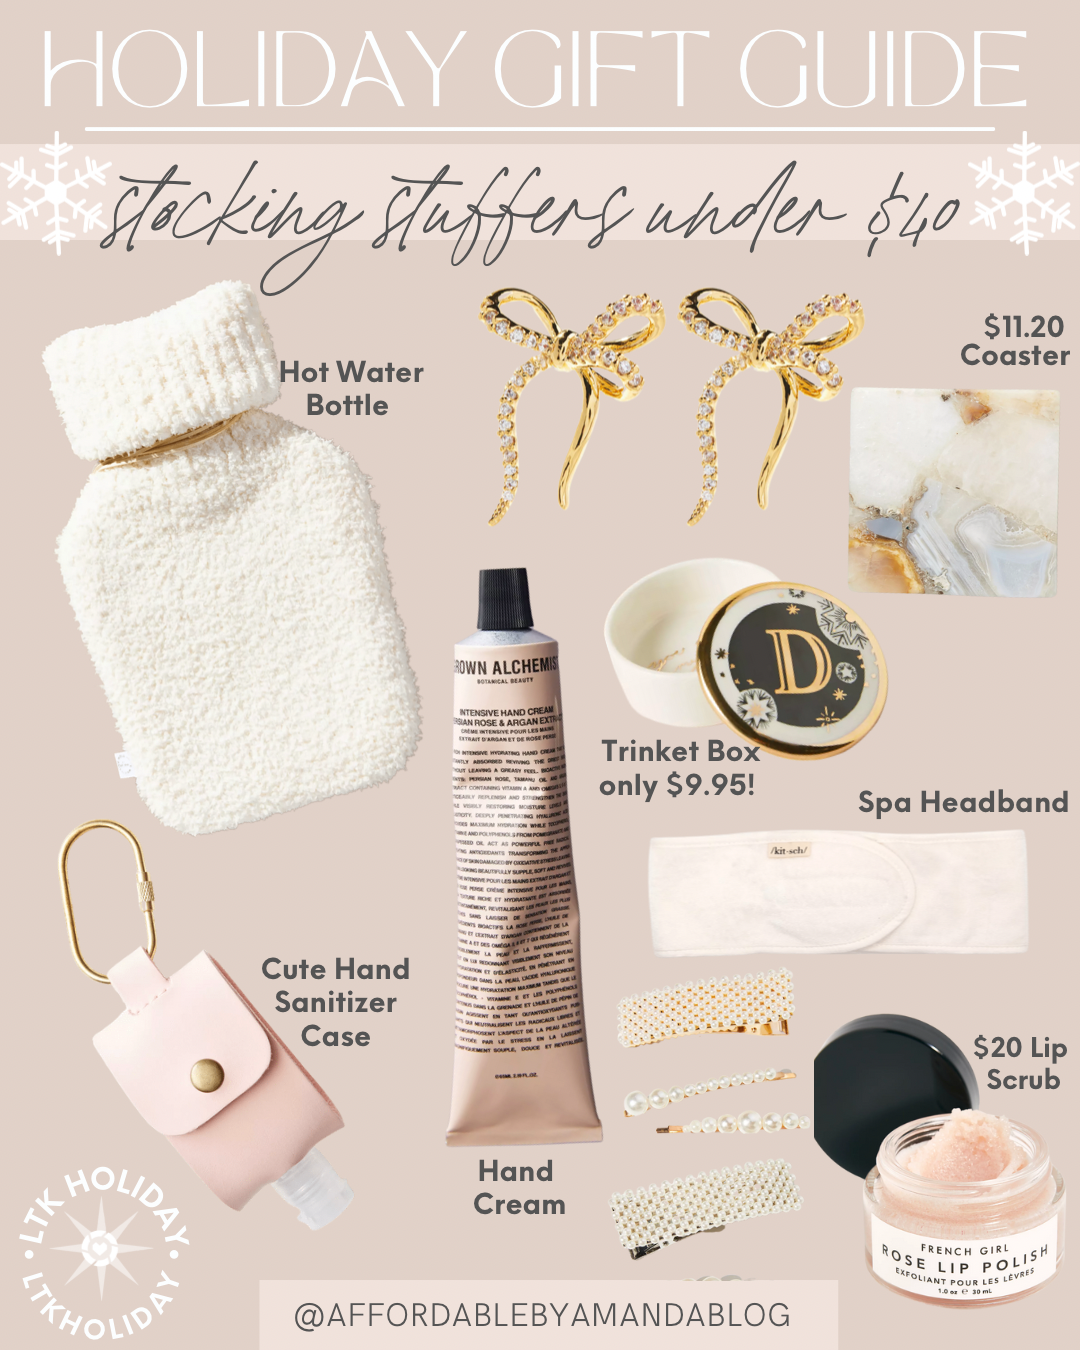 Holiday Gift Guide: Stocking Stuffers for Women | Affordable by Amanda